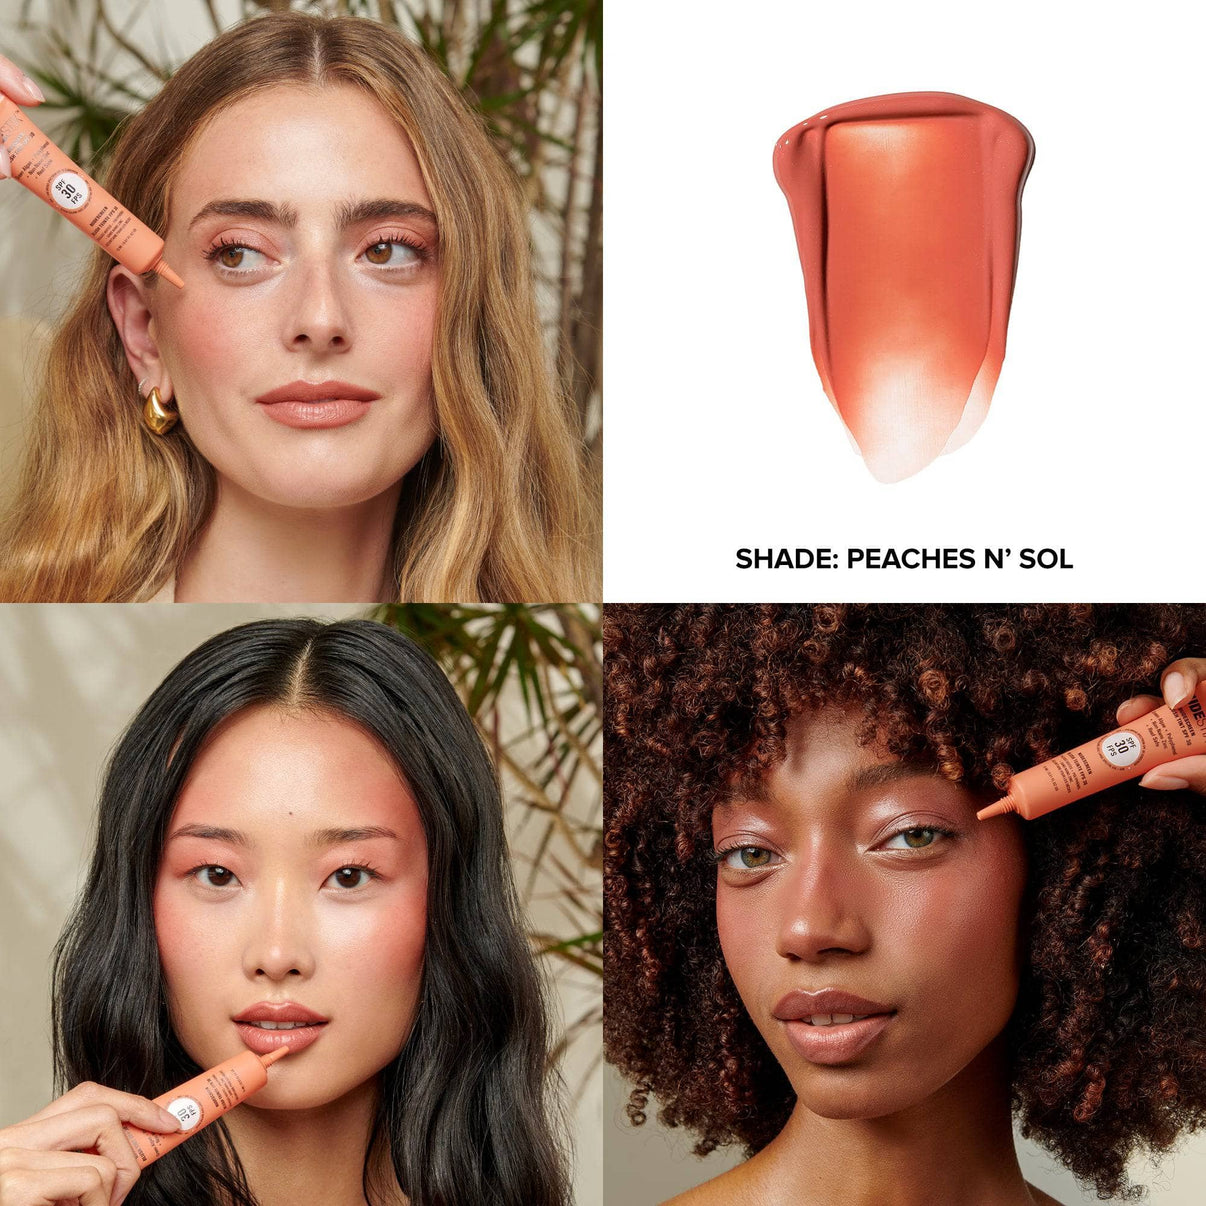 Grid with models wearing Nudescreen blush tint in shade PEACHES N' SOL